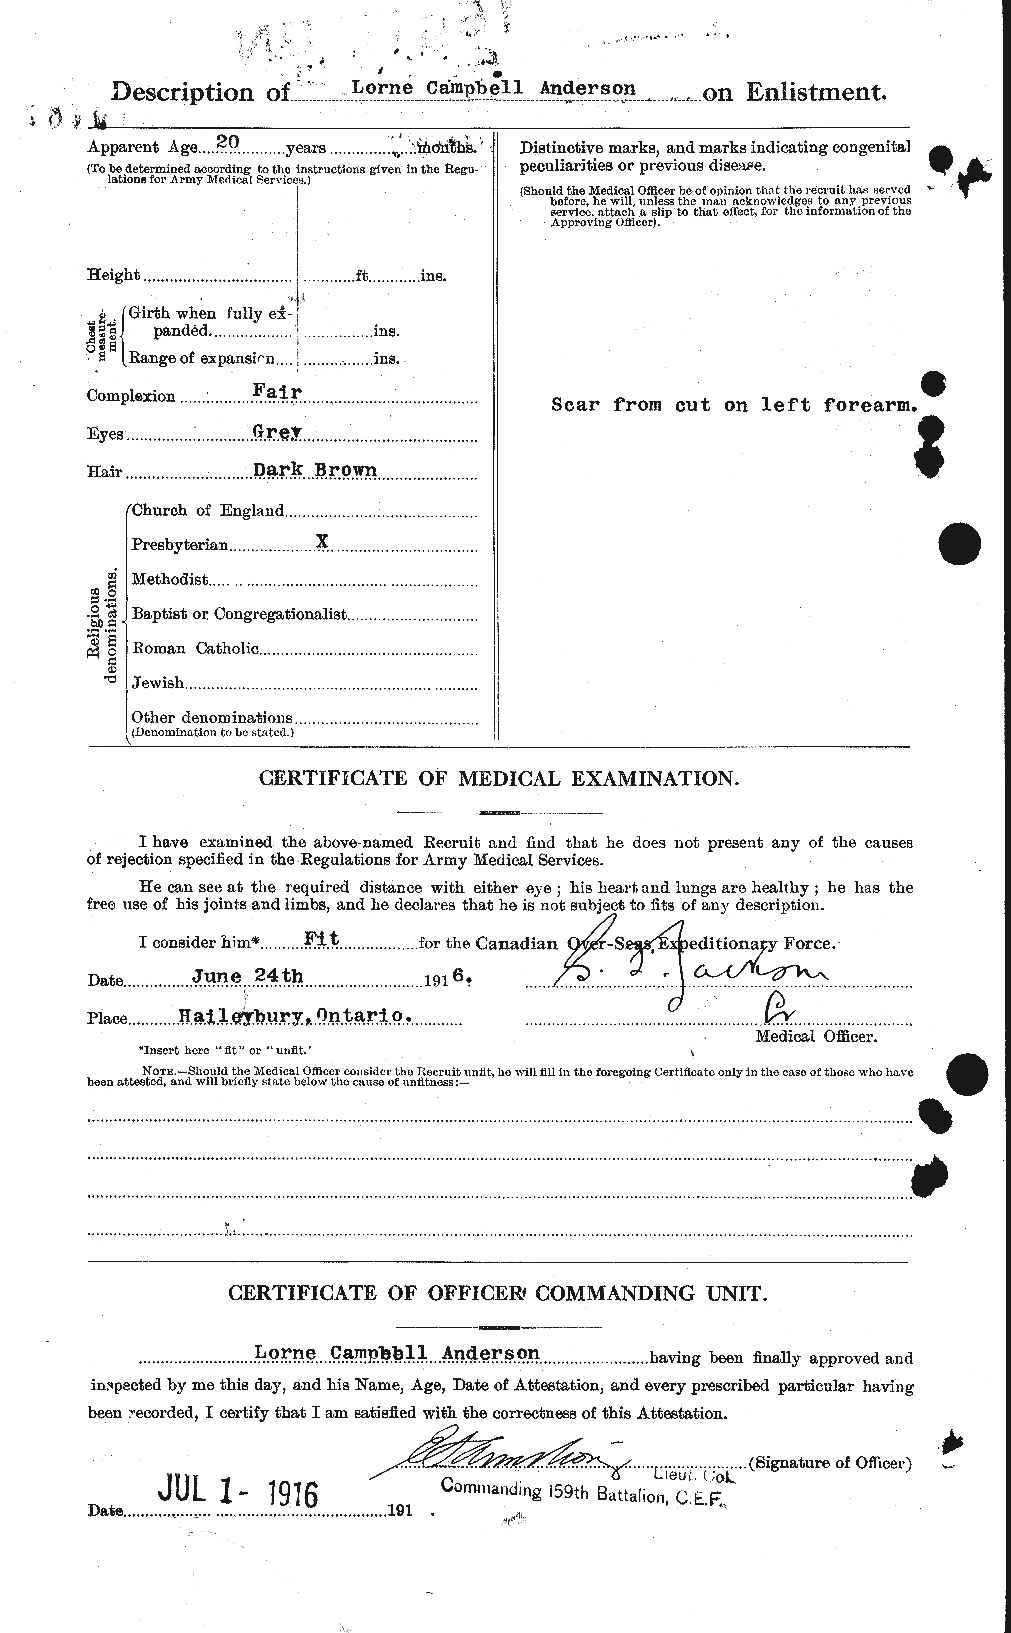 Personnel Records of the First World War - CEF 207510b